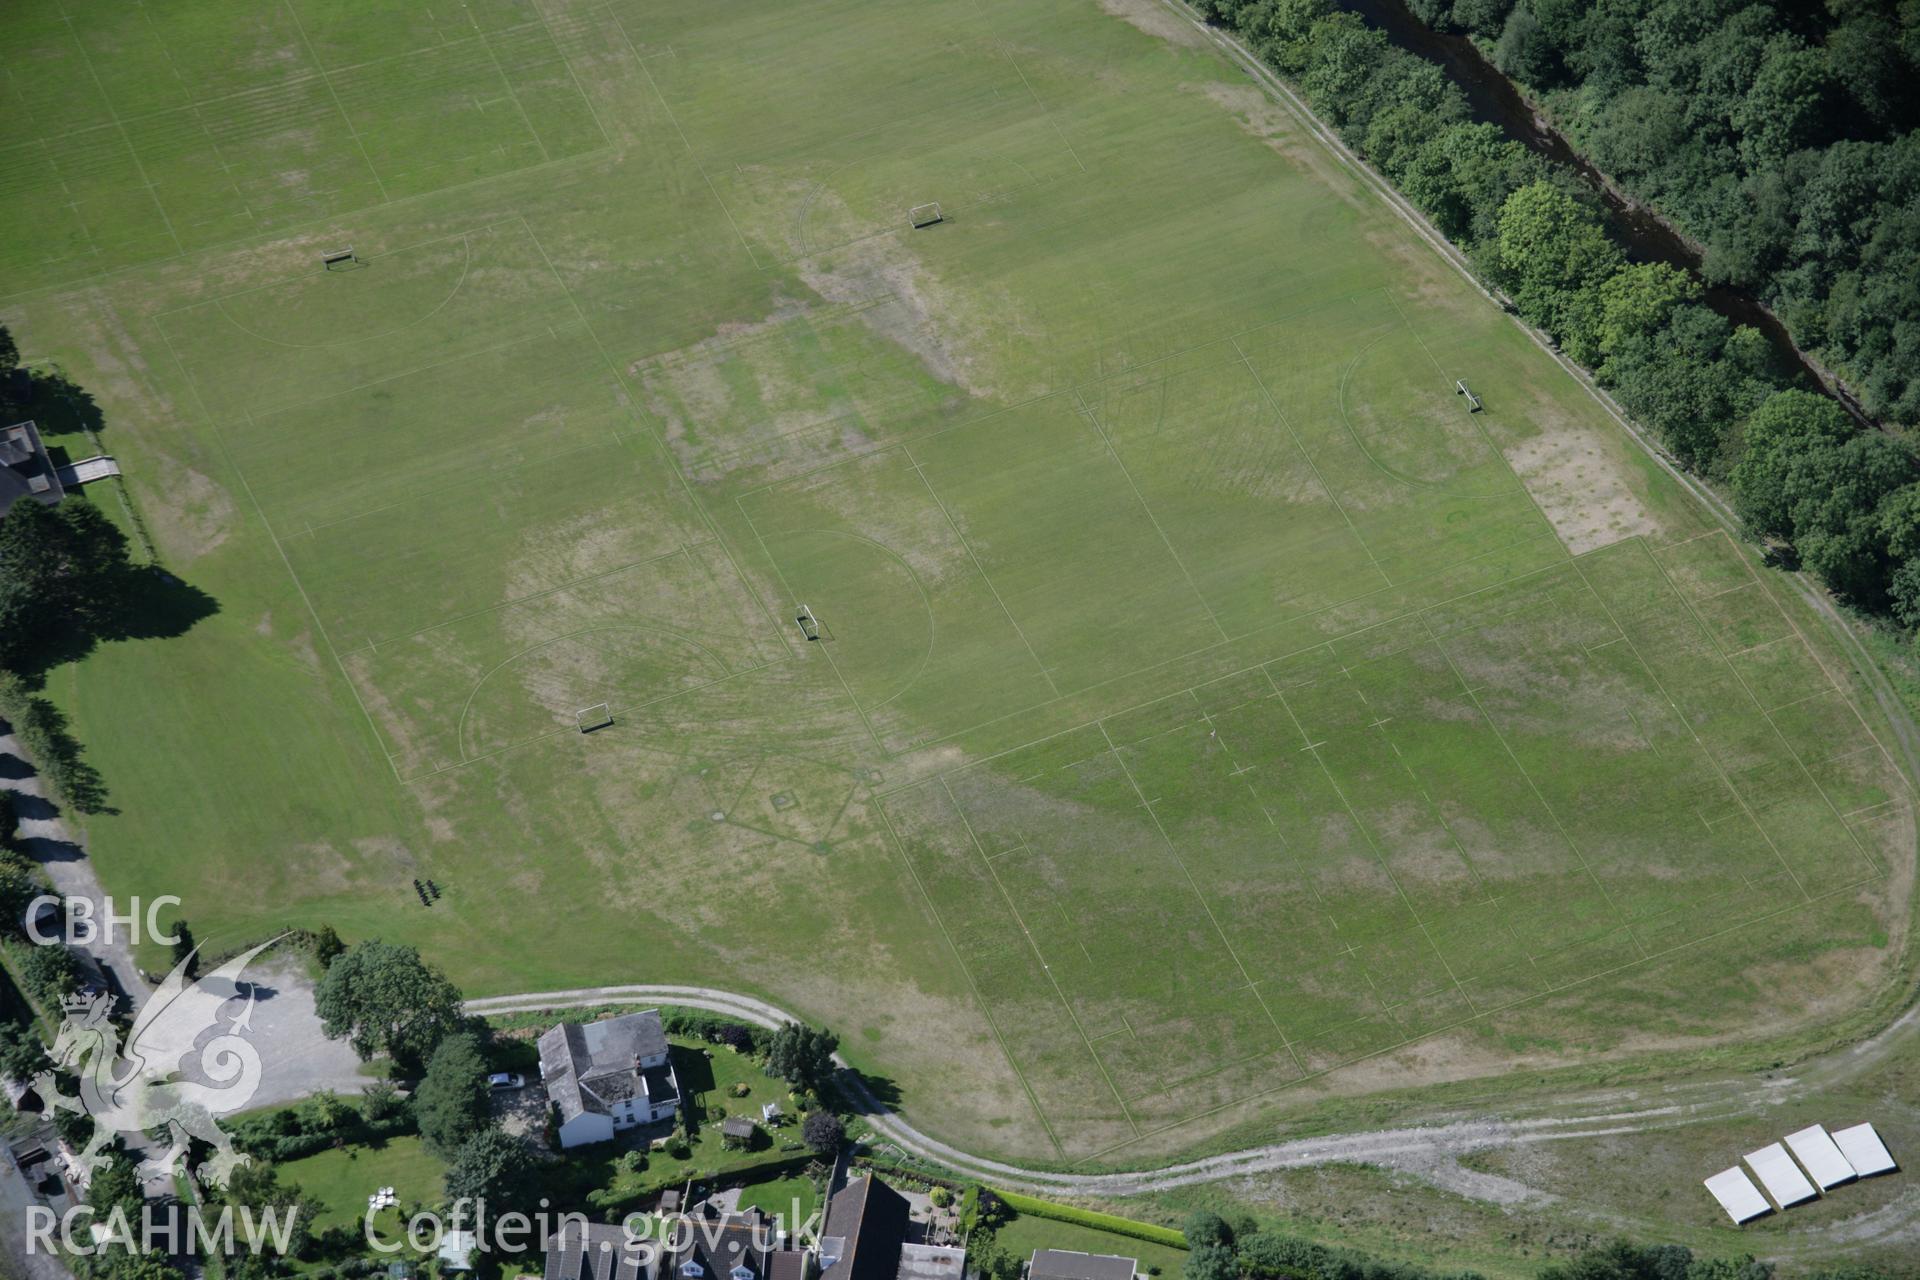 RCAHMW colour oblique aerial photograph of Llandovery from the east, with non-archaeological parchmarks on playing fields showing former river channels and pitches Taken on 02 September 2005 by Toby Driver